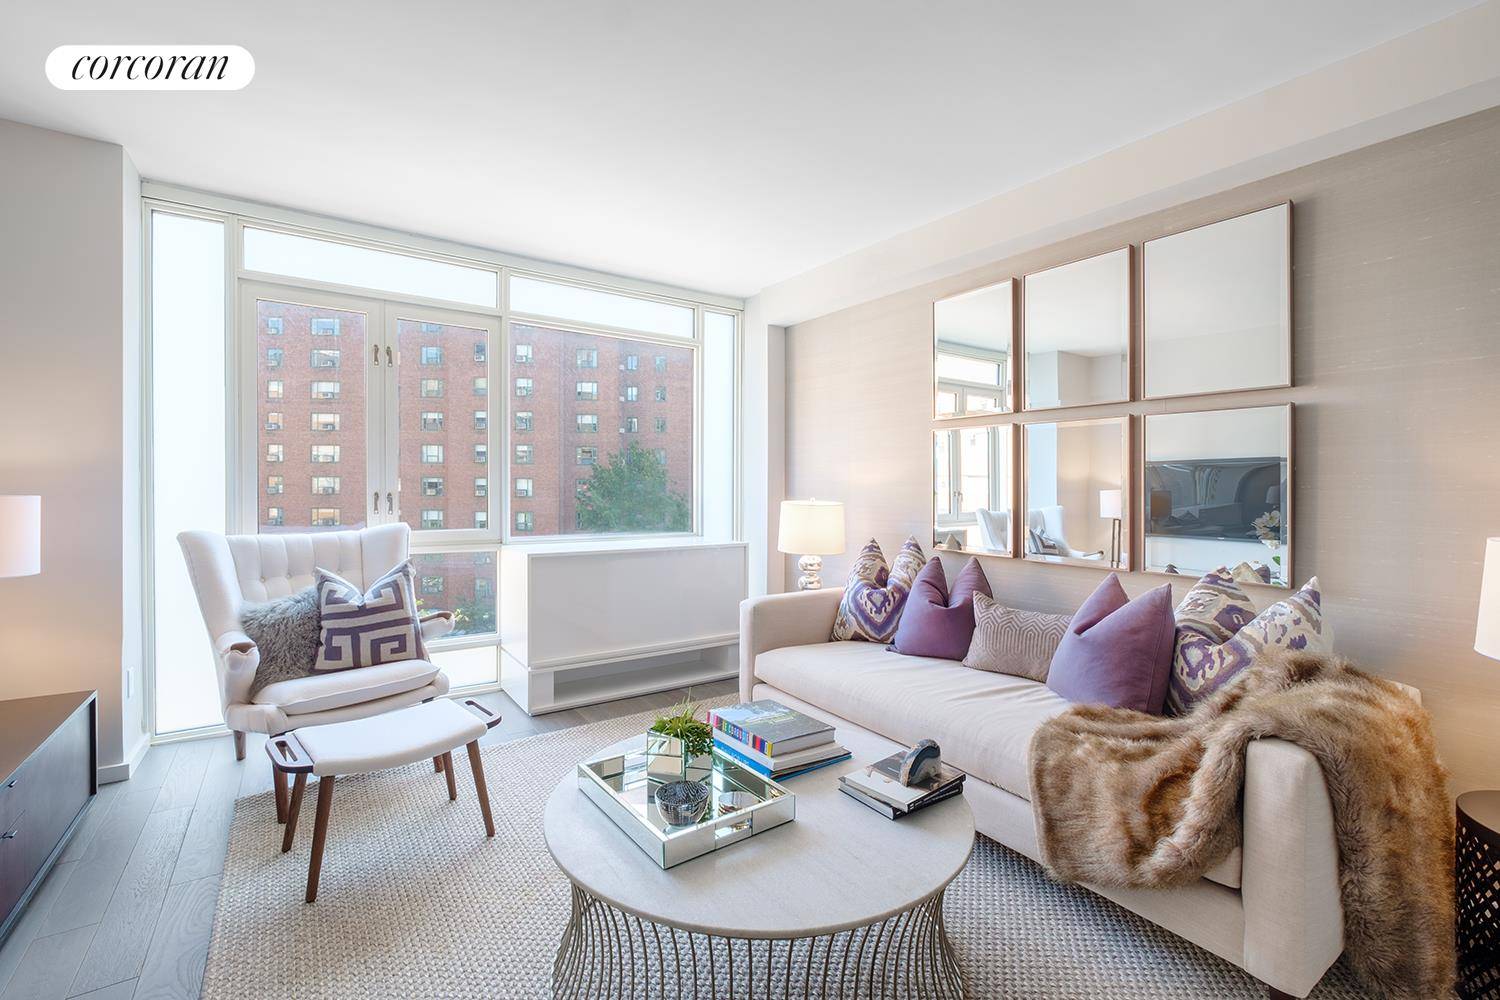 Residence 8F is a graciously proportioned east facing apartment with views to the East River through oversized windows and a sunlit living room.